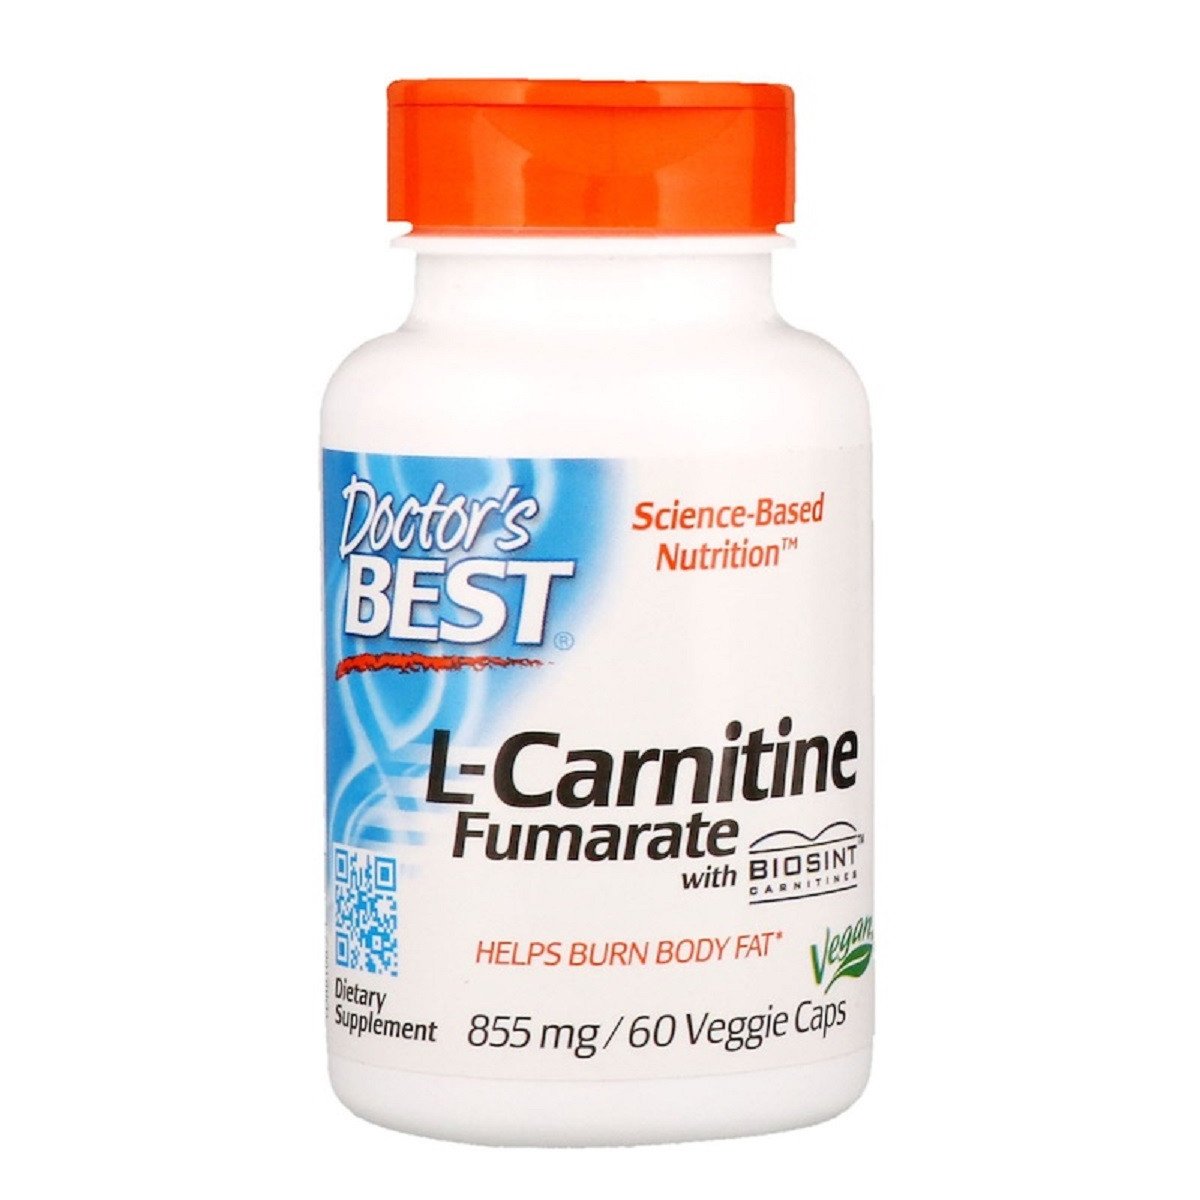 Doctor's BEST Л-карнитин Фумарат, L-Carnitine Fumarate, Doctor's Best, 855 мг, 60 капсул доктор бест, , 60 